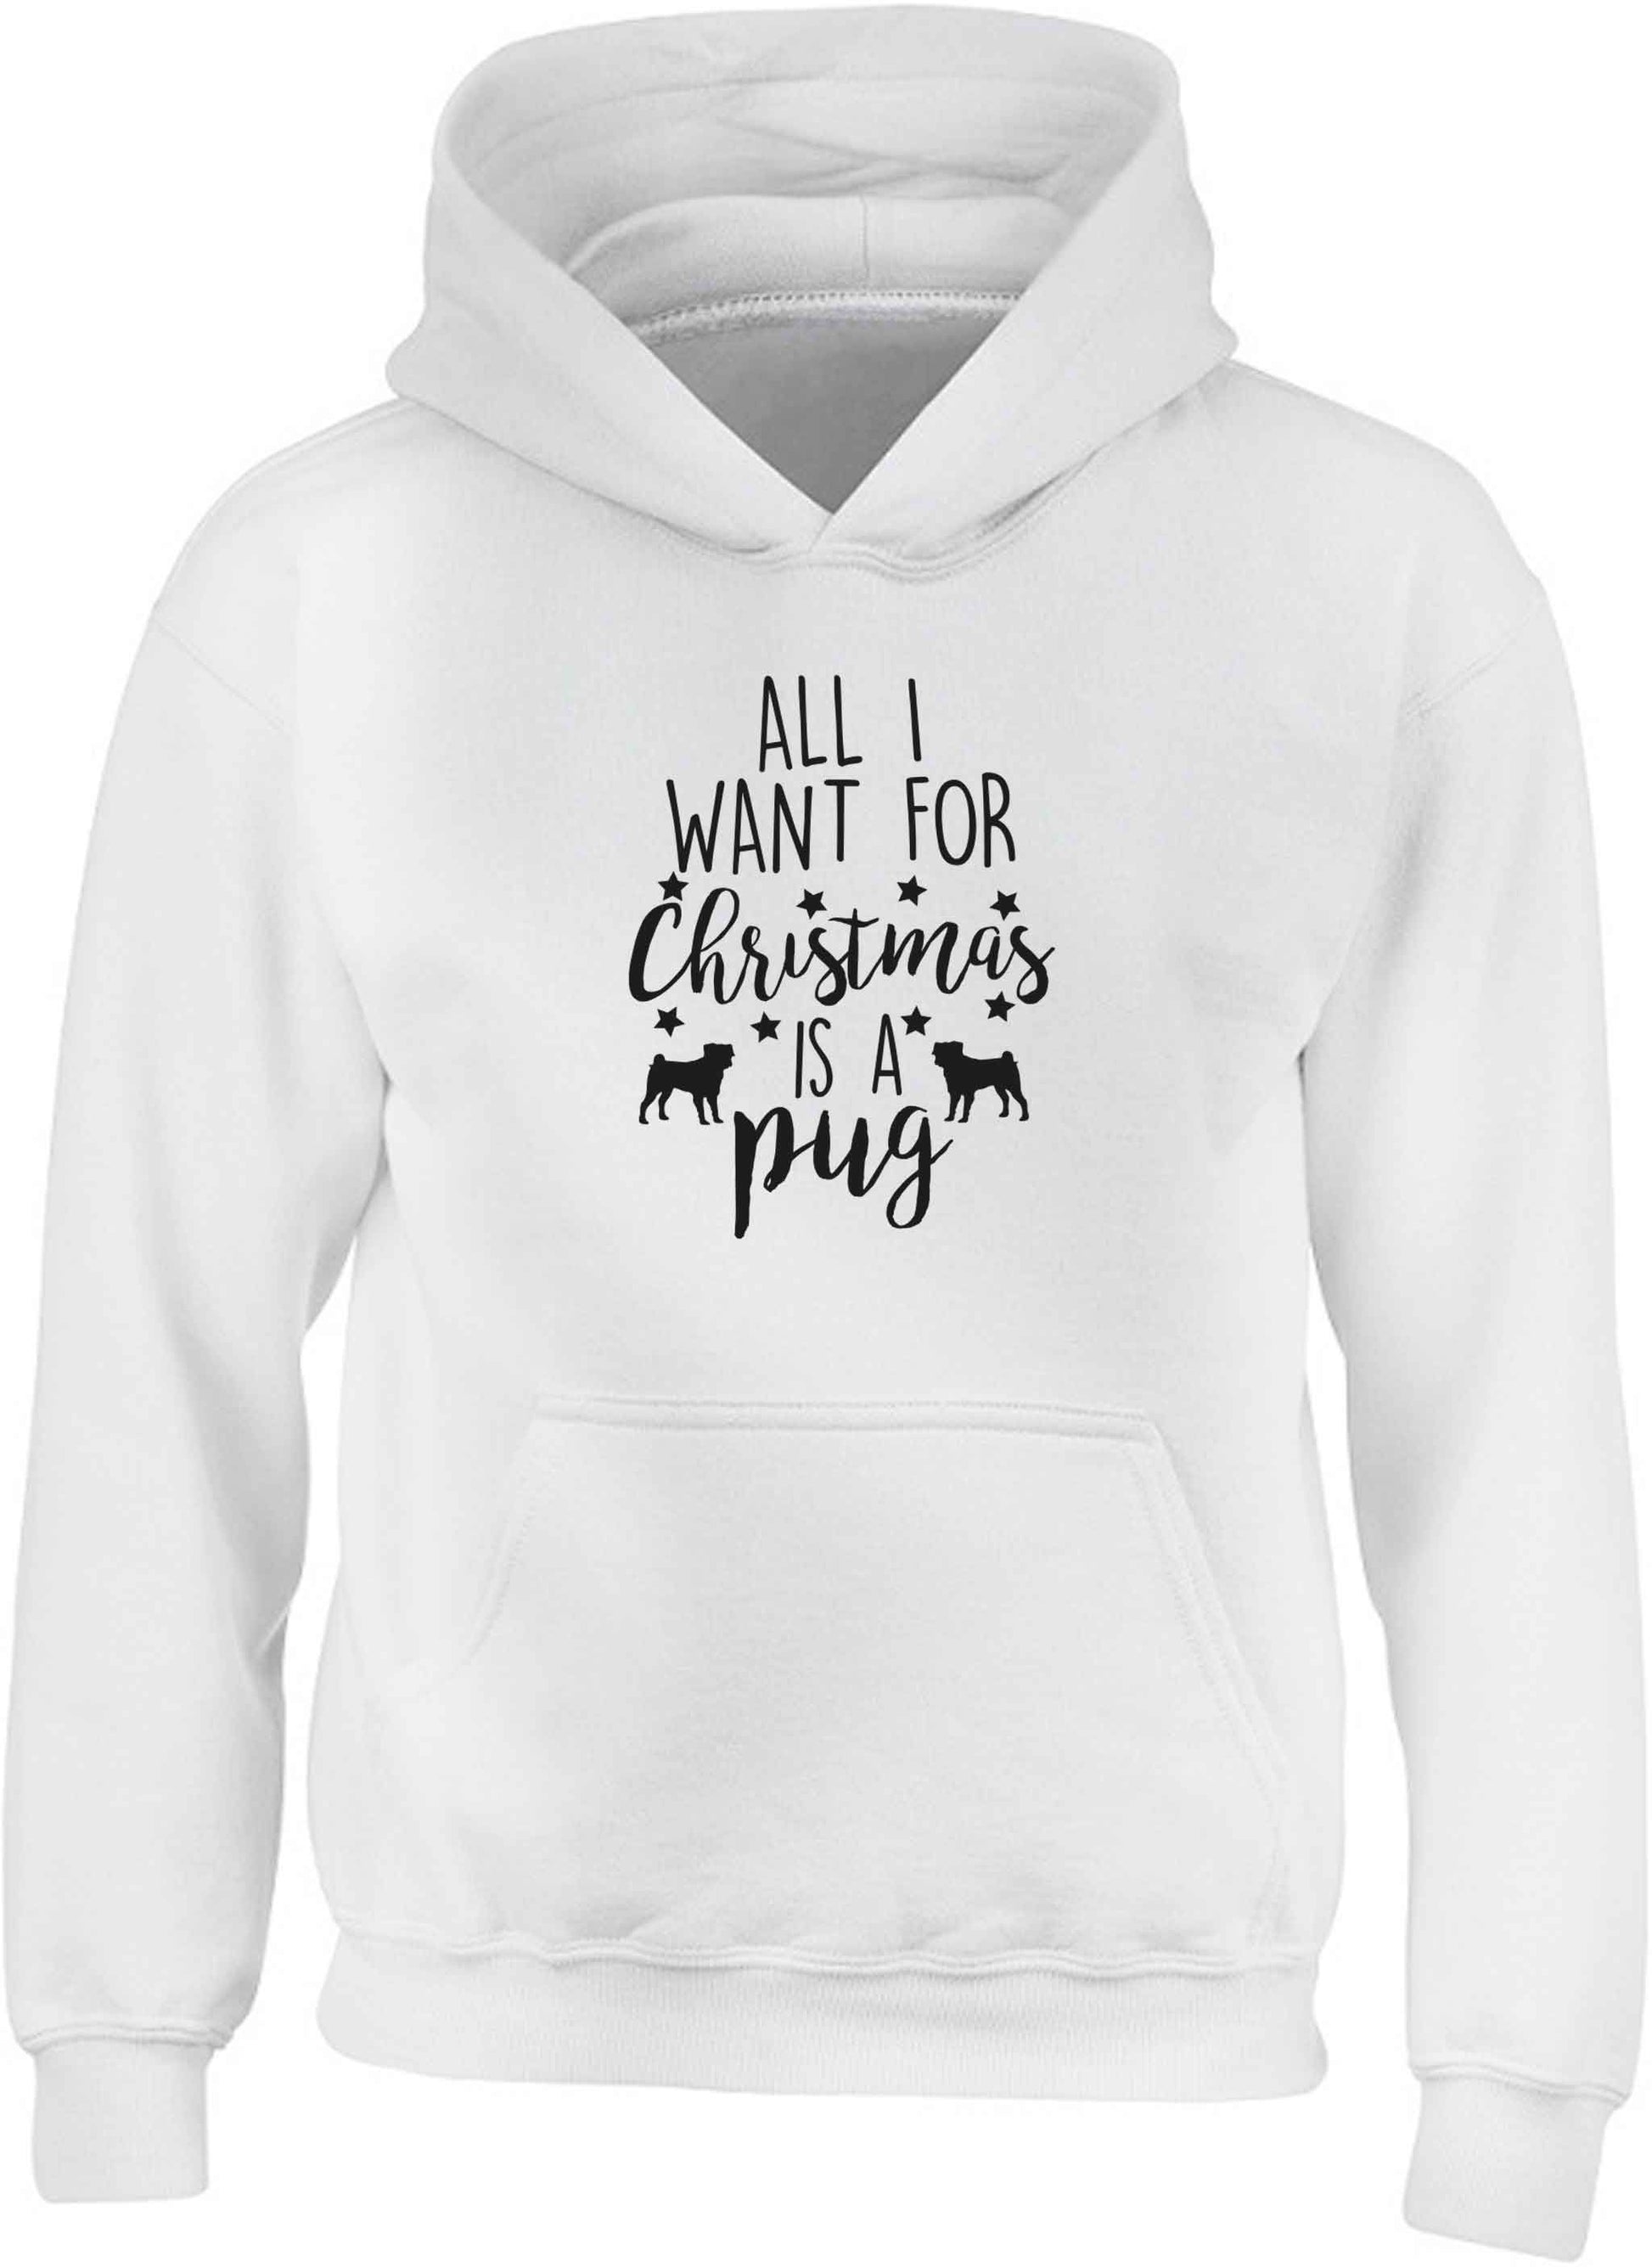 All I want for Christmas is a pug children's white hoodie 12-13 Years